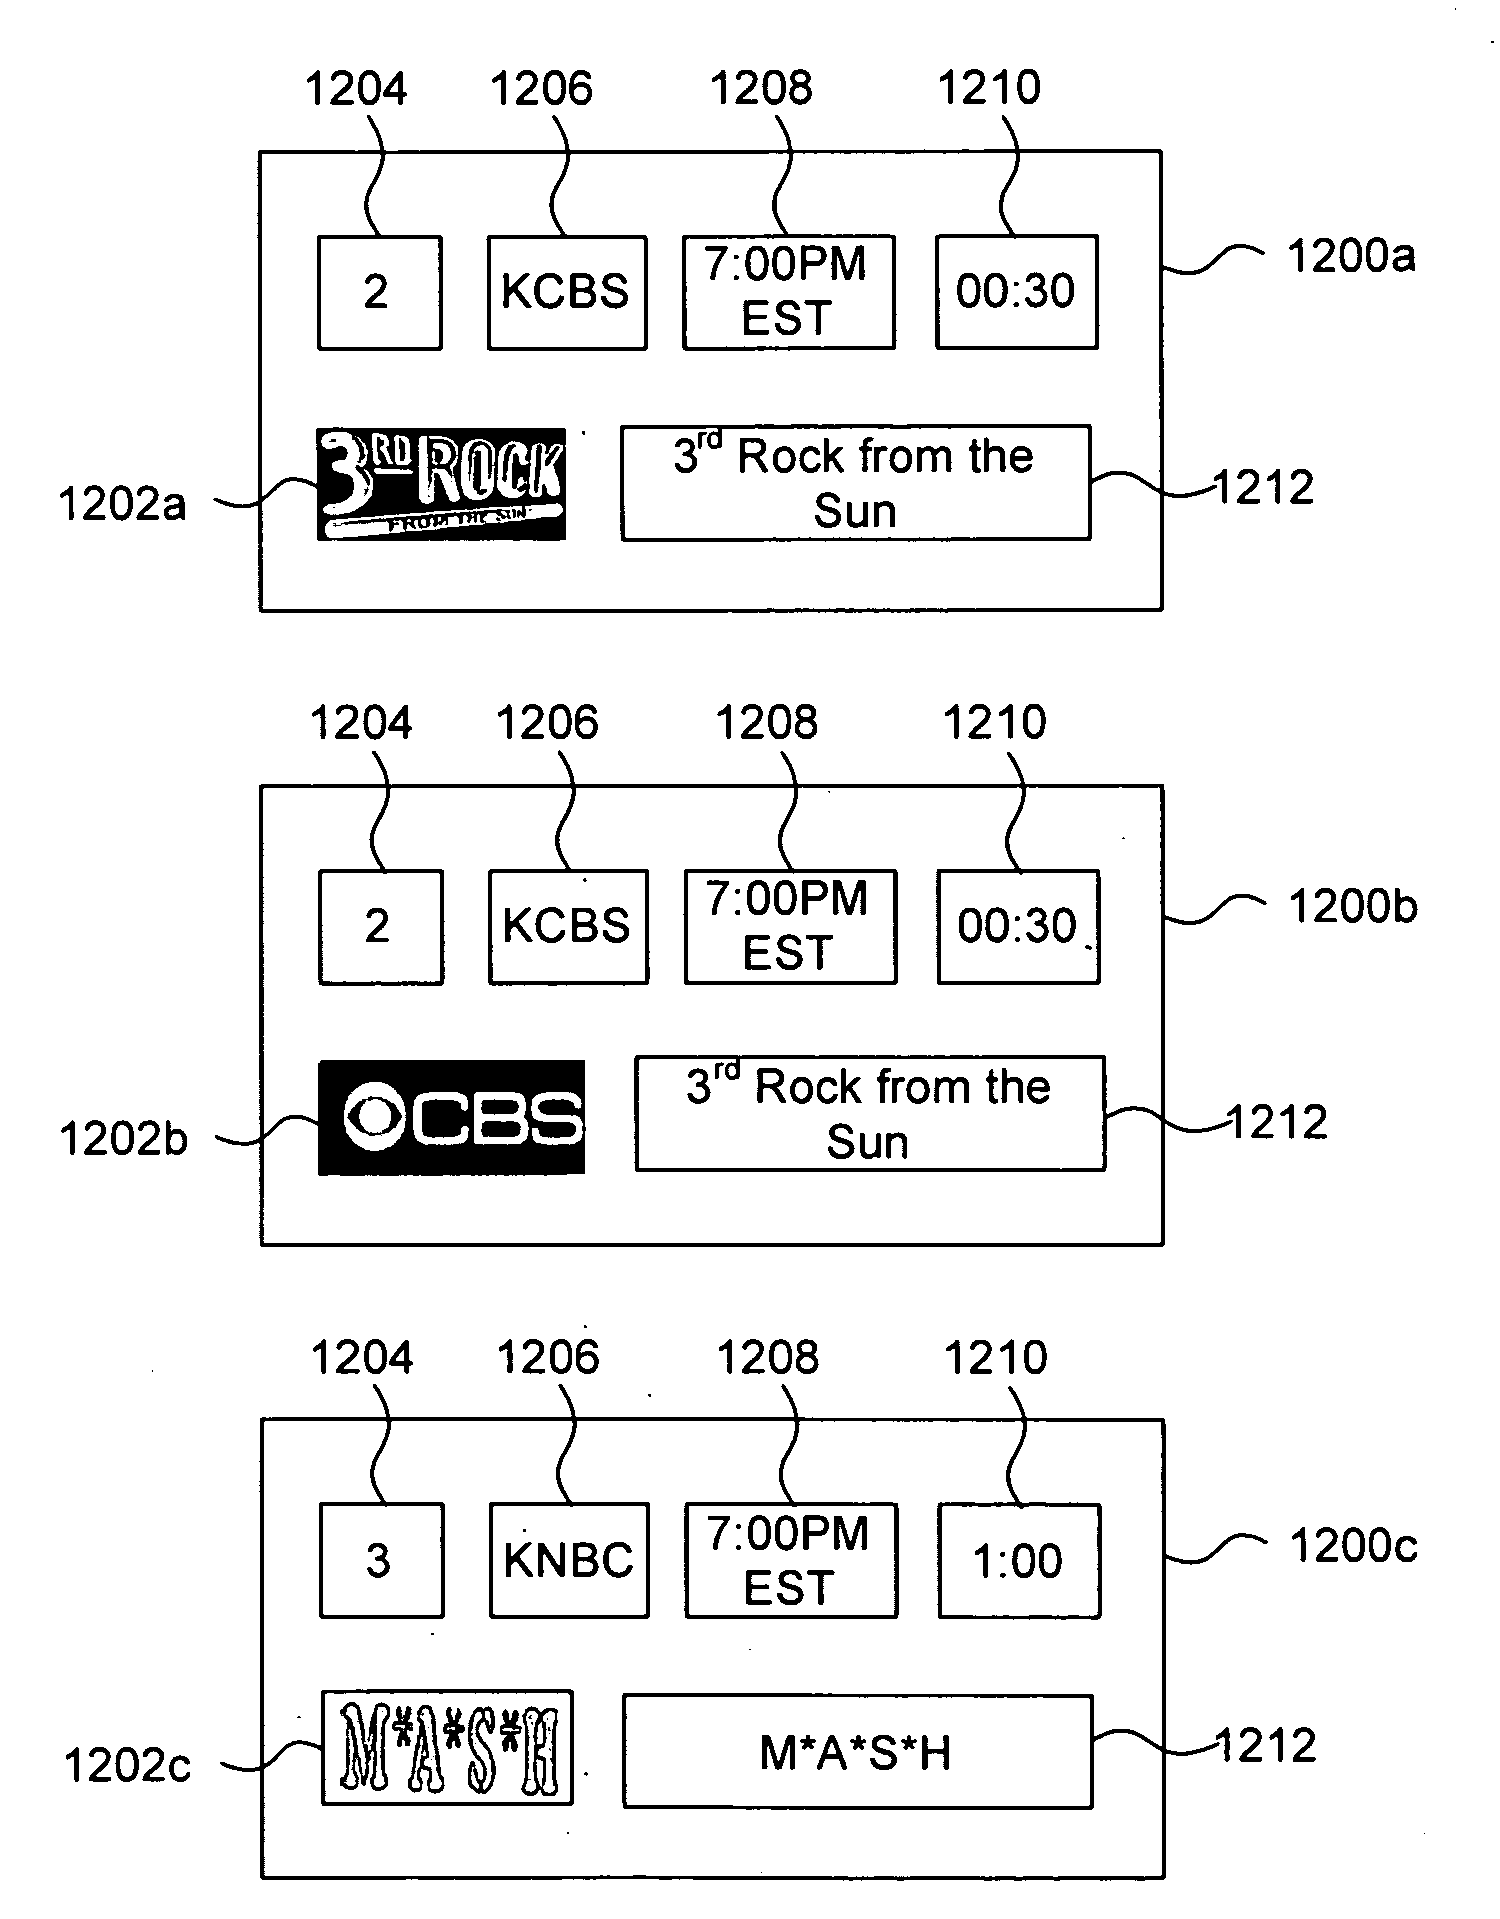 System and method for focused navigation in a media center/extension device architecture